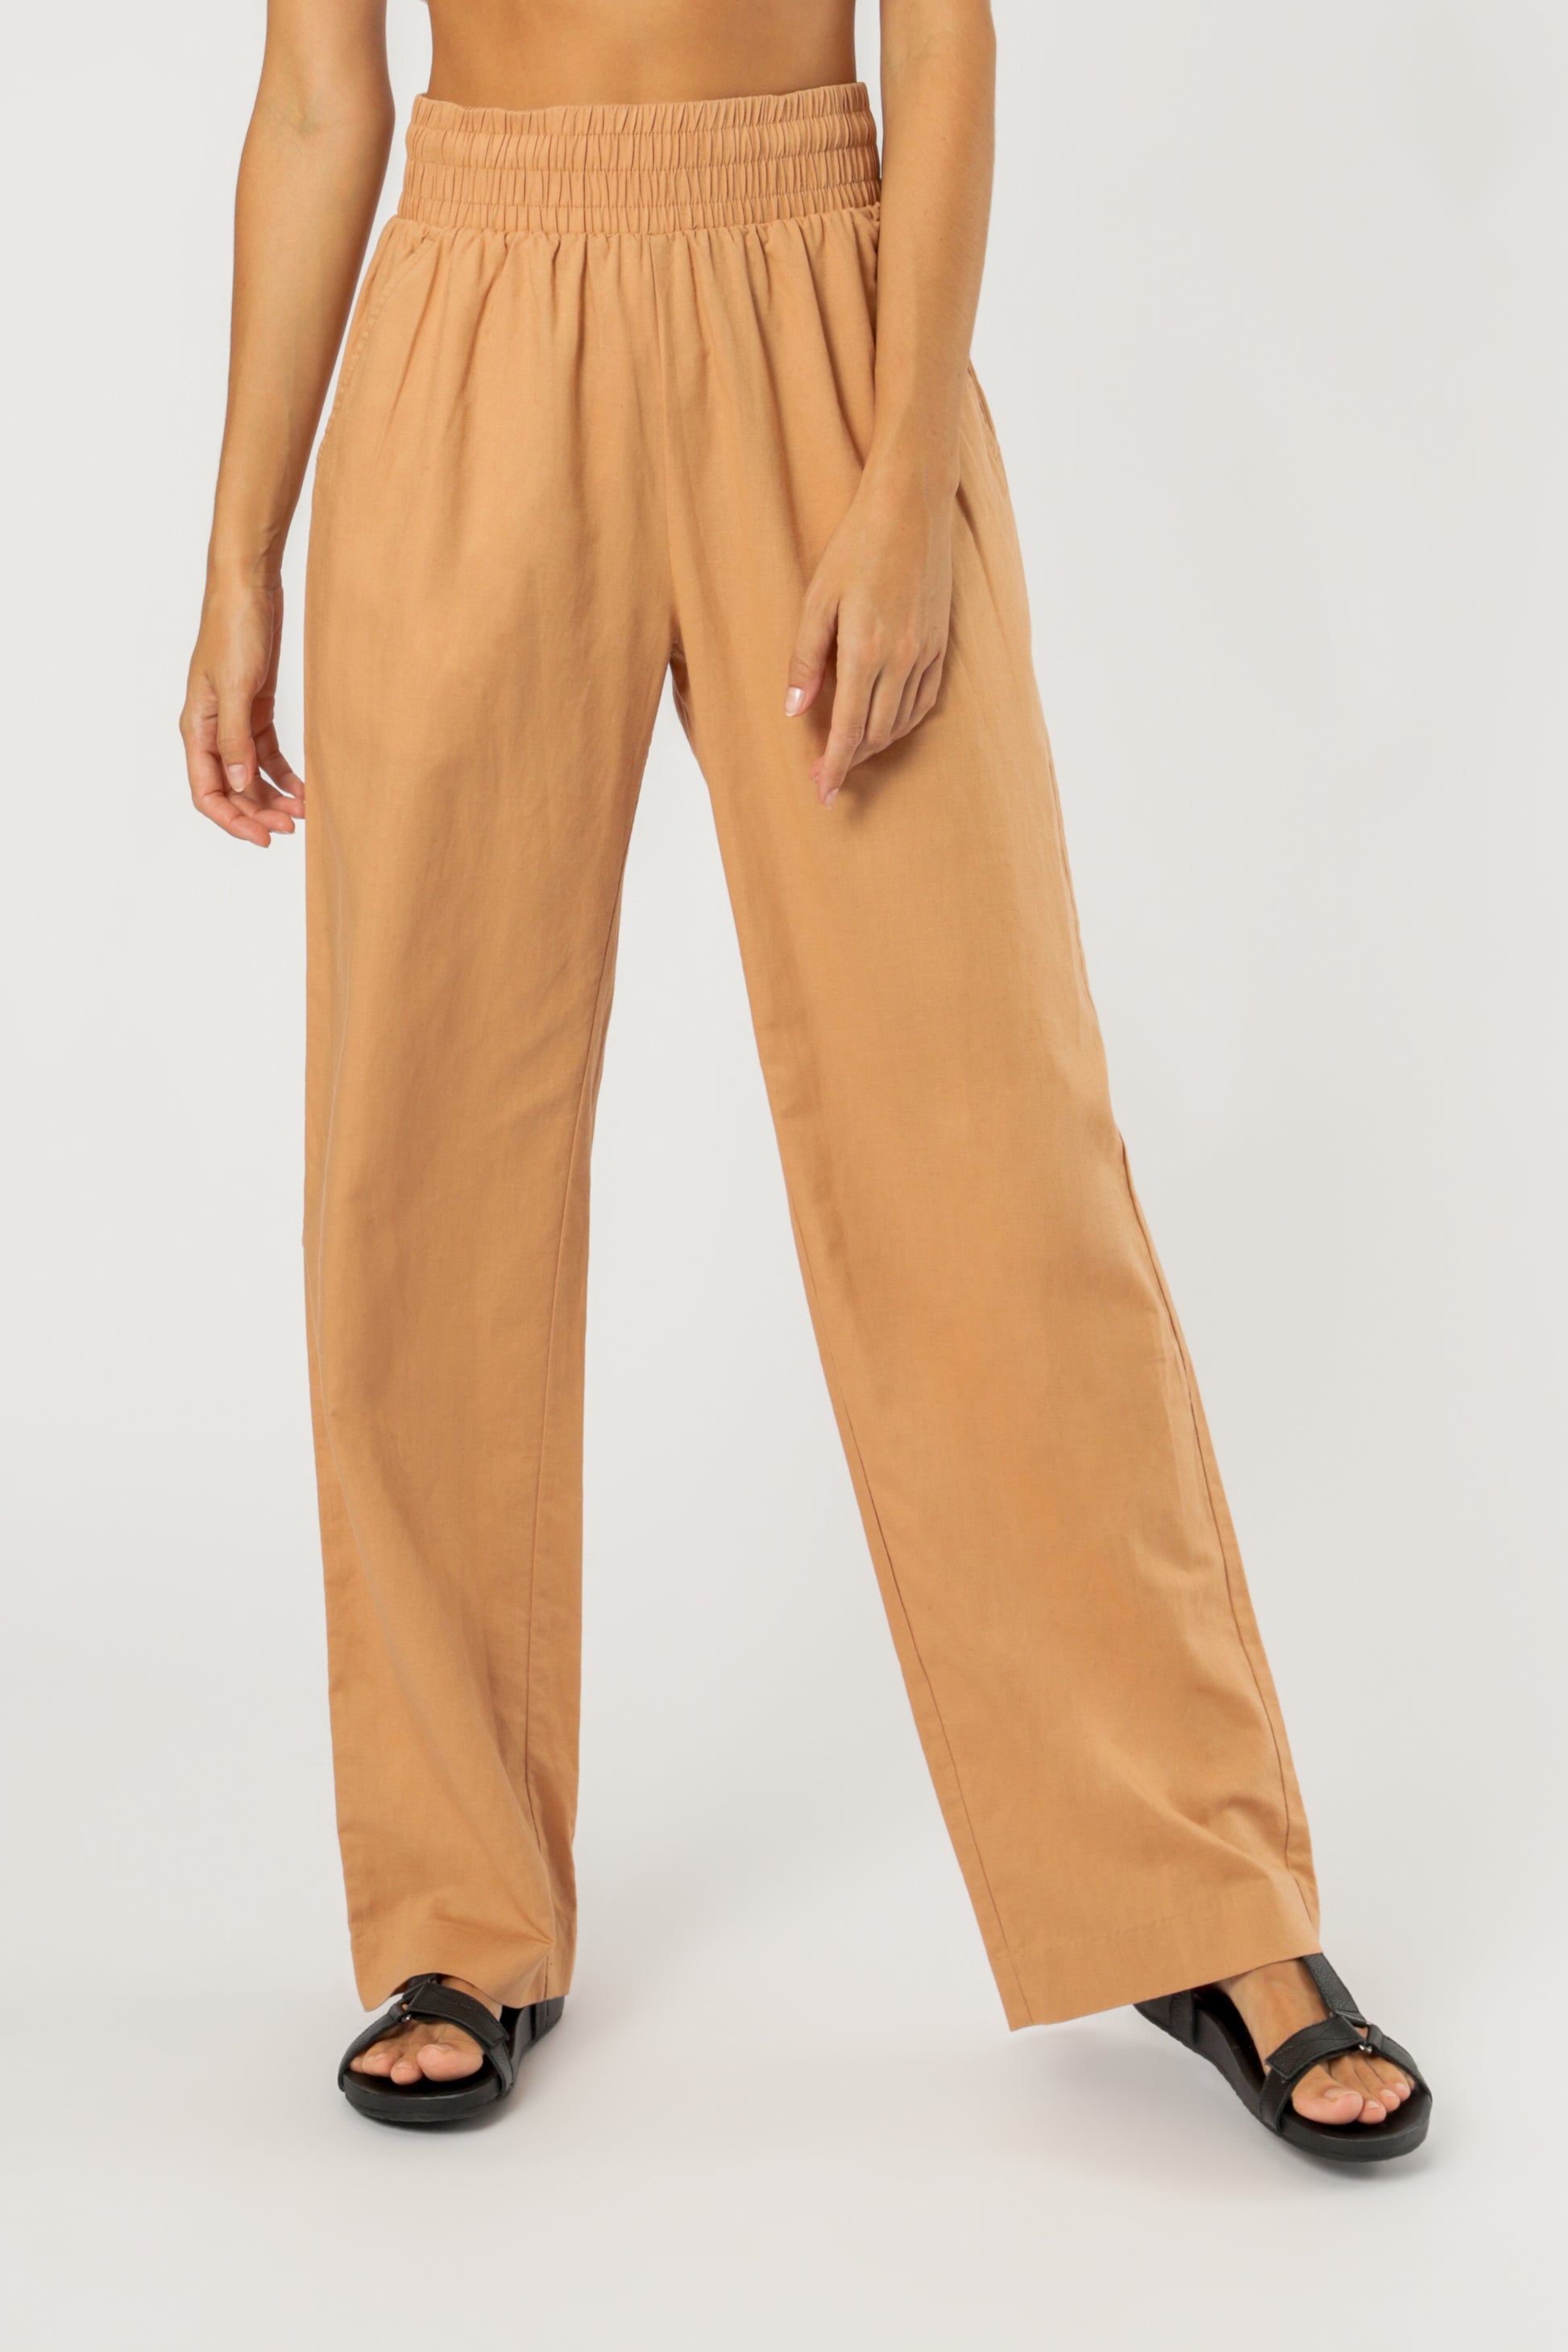 Nude Lucy amber linen pant clay pants